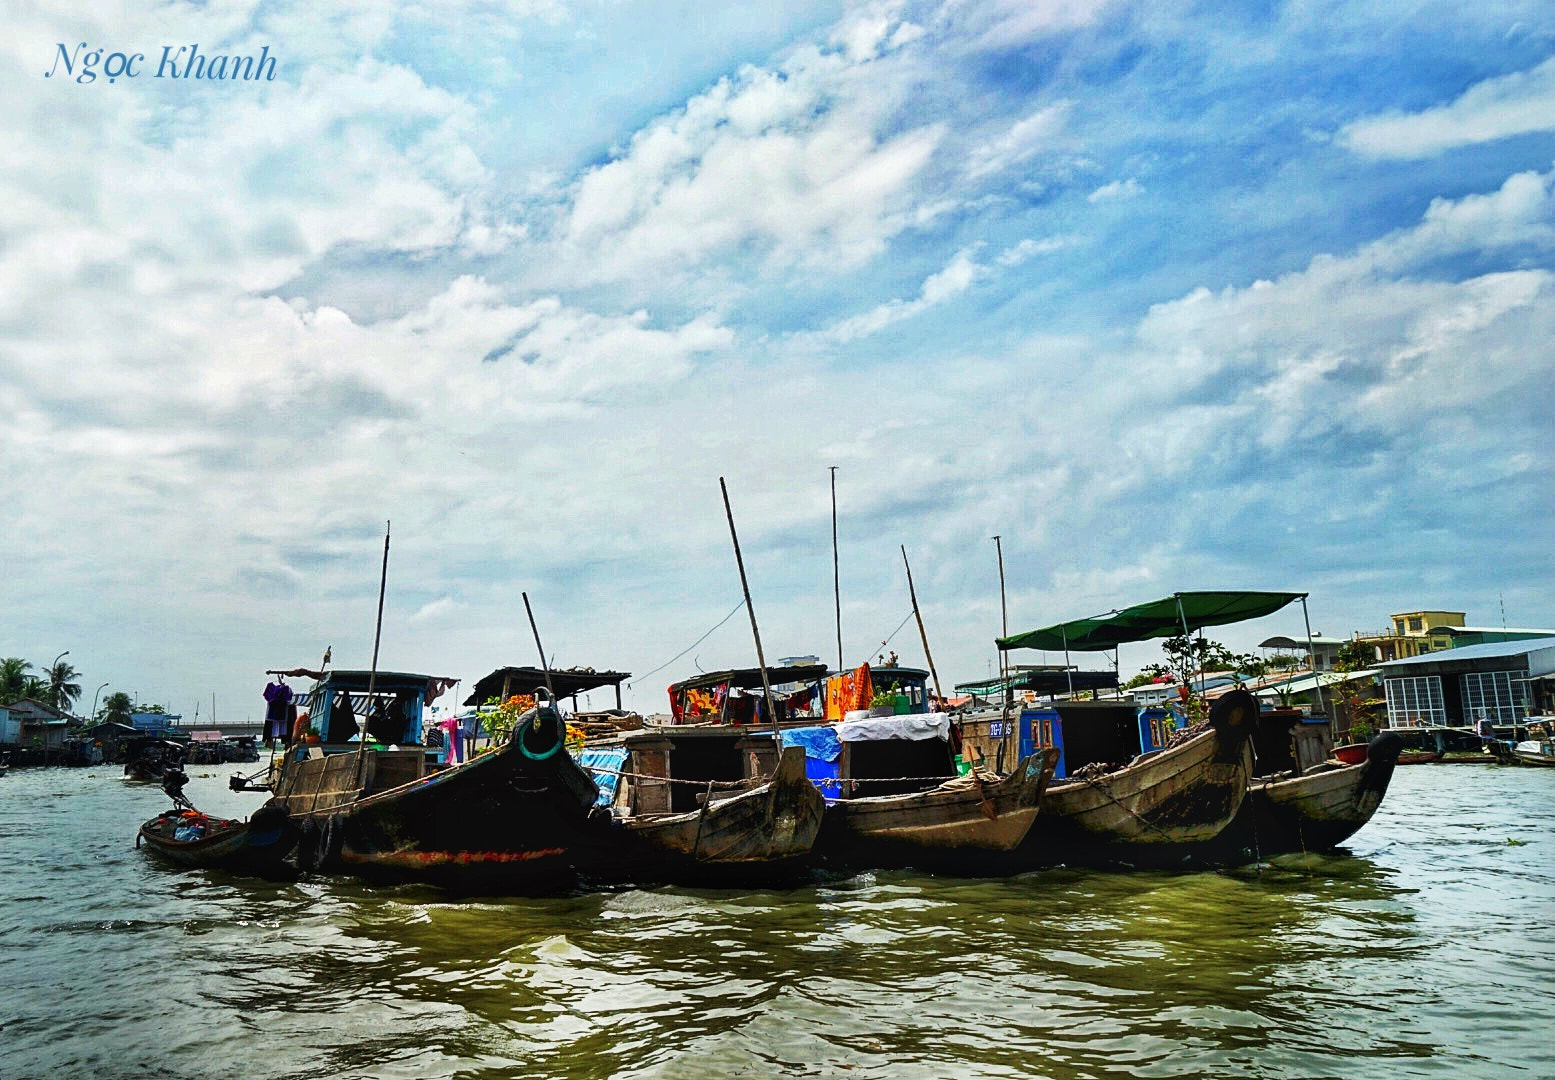 Sony a7 II sample photo. Cai rang floating market on vietnam tien giang river photography